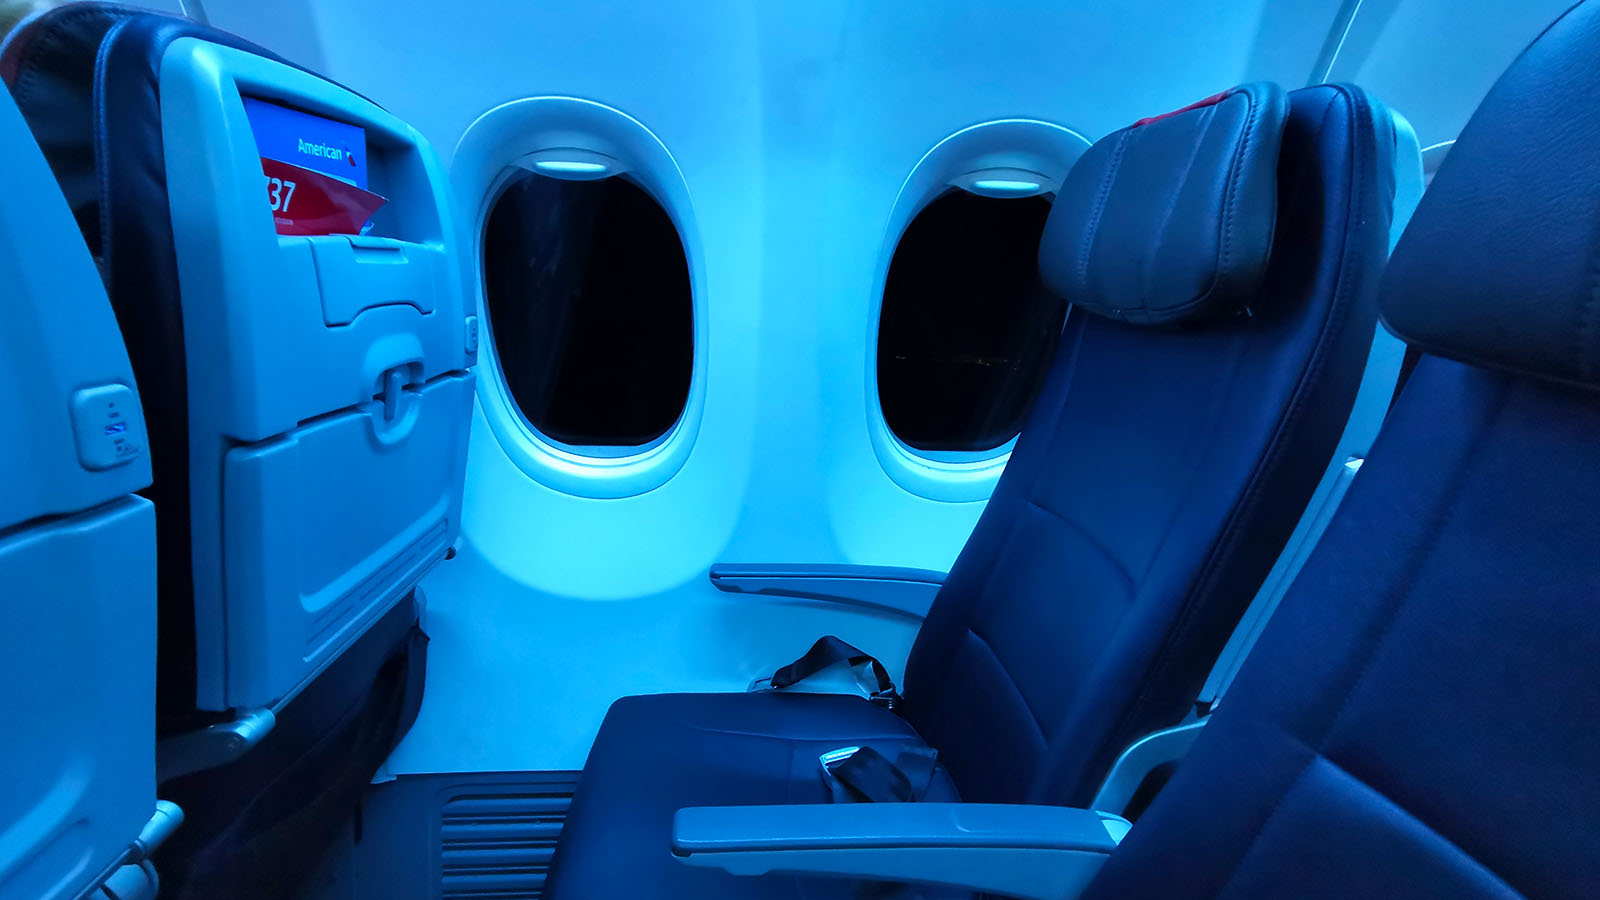 Blue colour in American Airlines Boeing 737 Economy